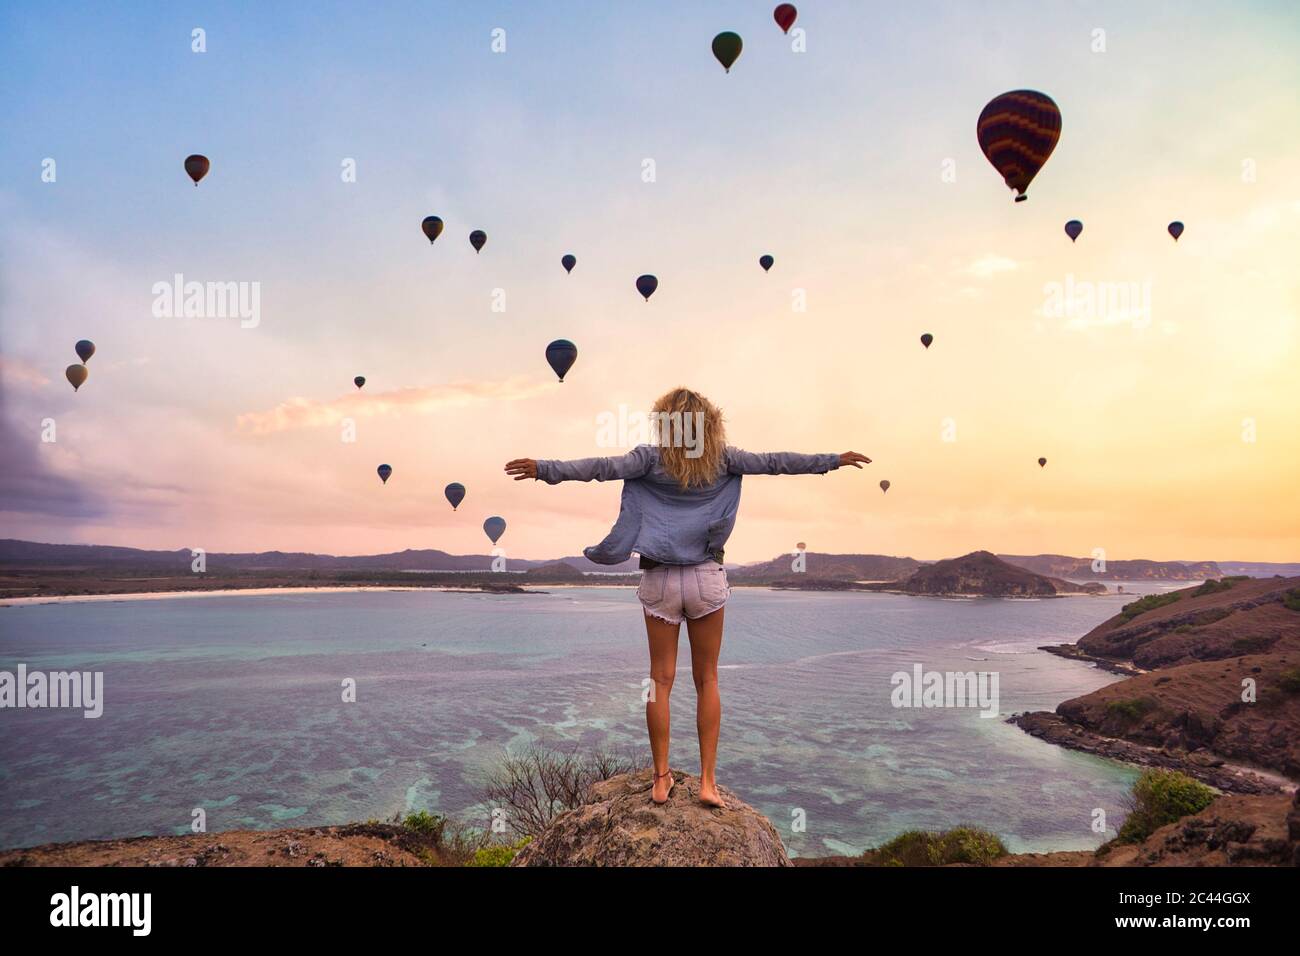 Indonesia, West Nusa Tenggara, Hot air balloons flying over lone woman standing on rocky shore with raised arms Stock Photo